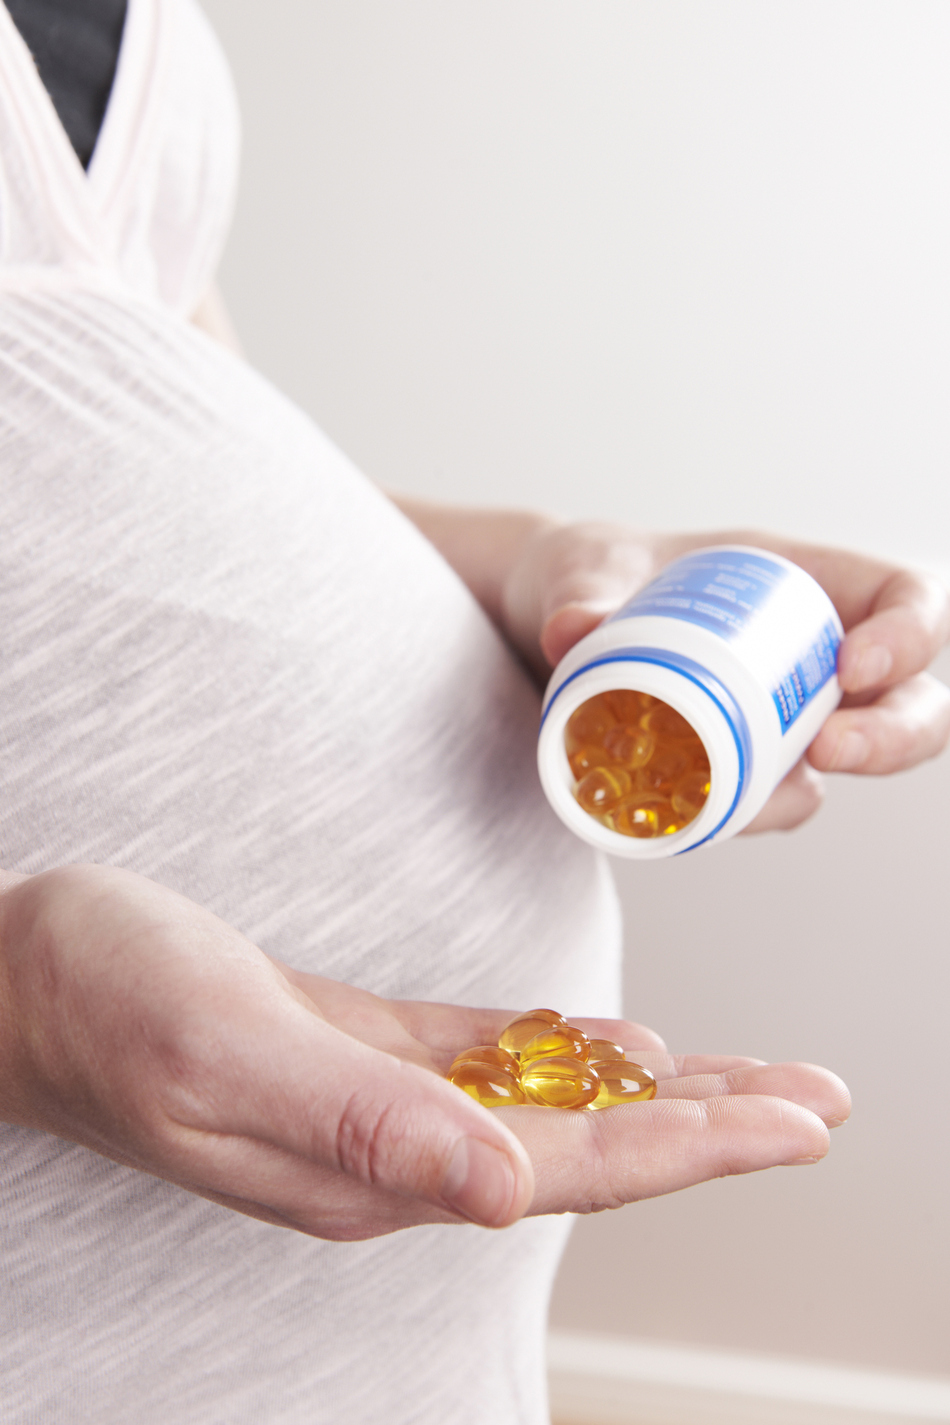 Fish Oil for Pregnant Mothers Could Help their Children Avoid Asthma